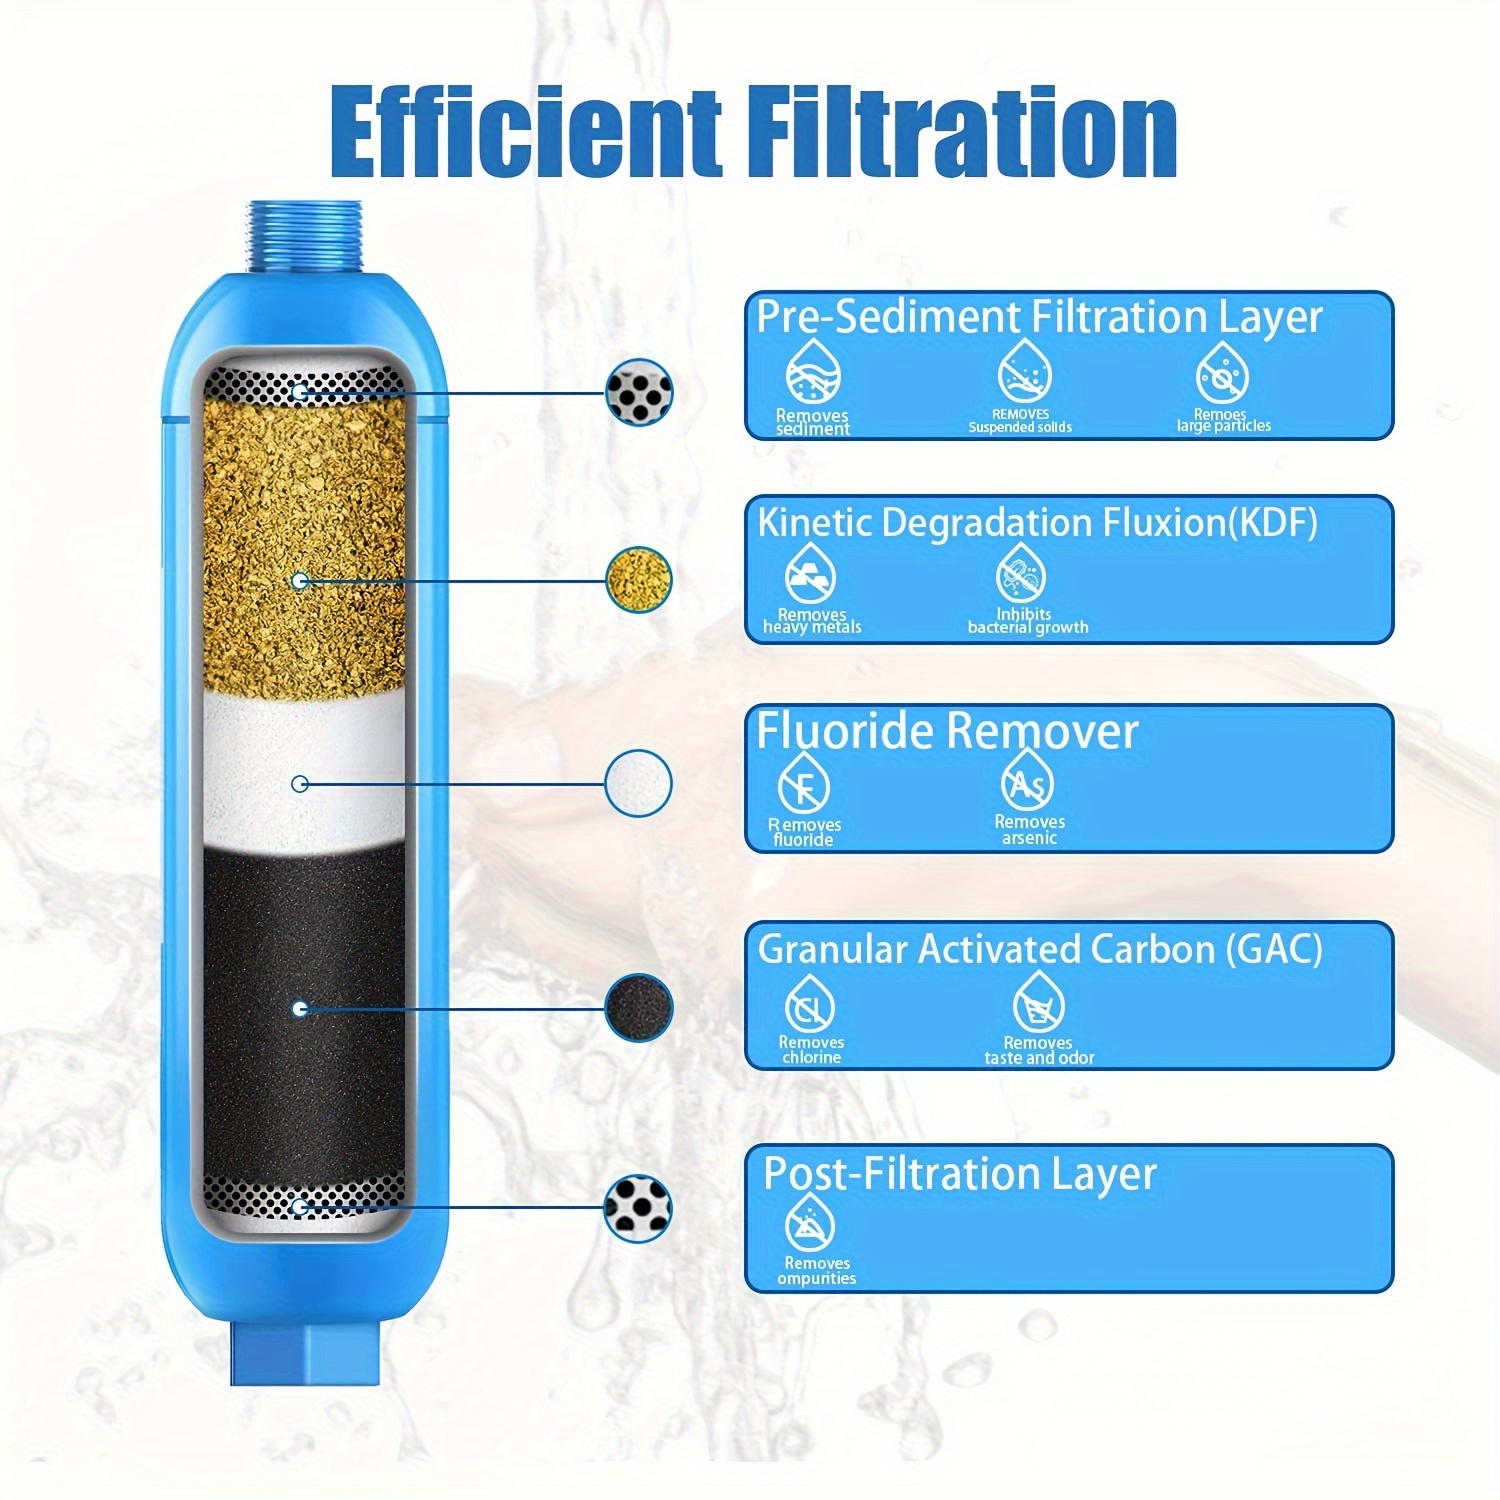 Rv Water Filter Hose Protector inline Water Filter Reduces - Temu